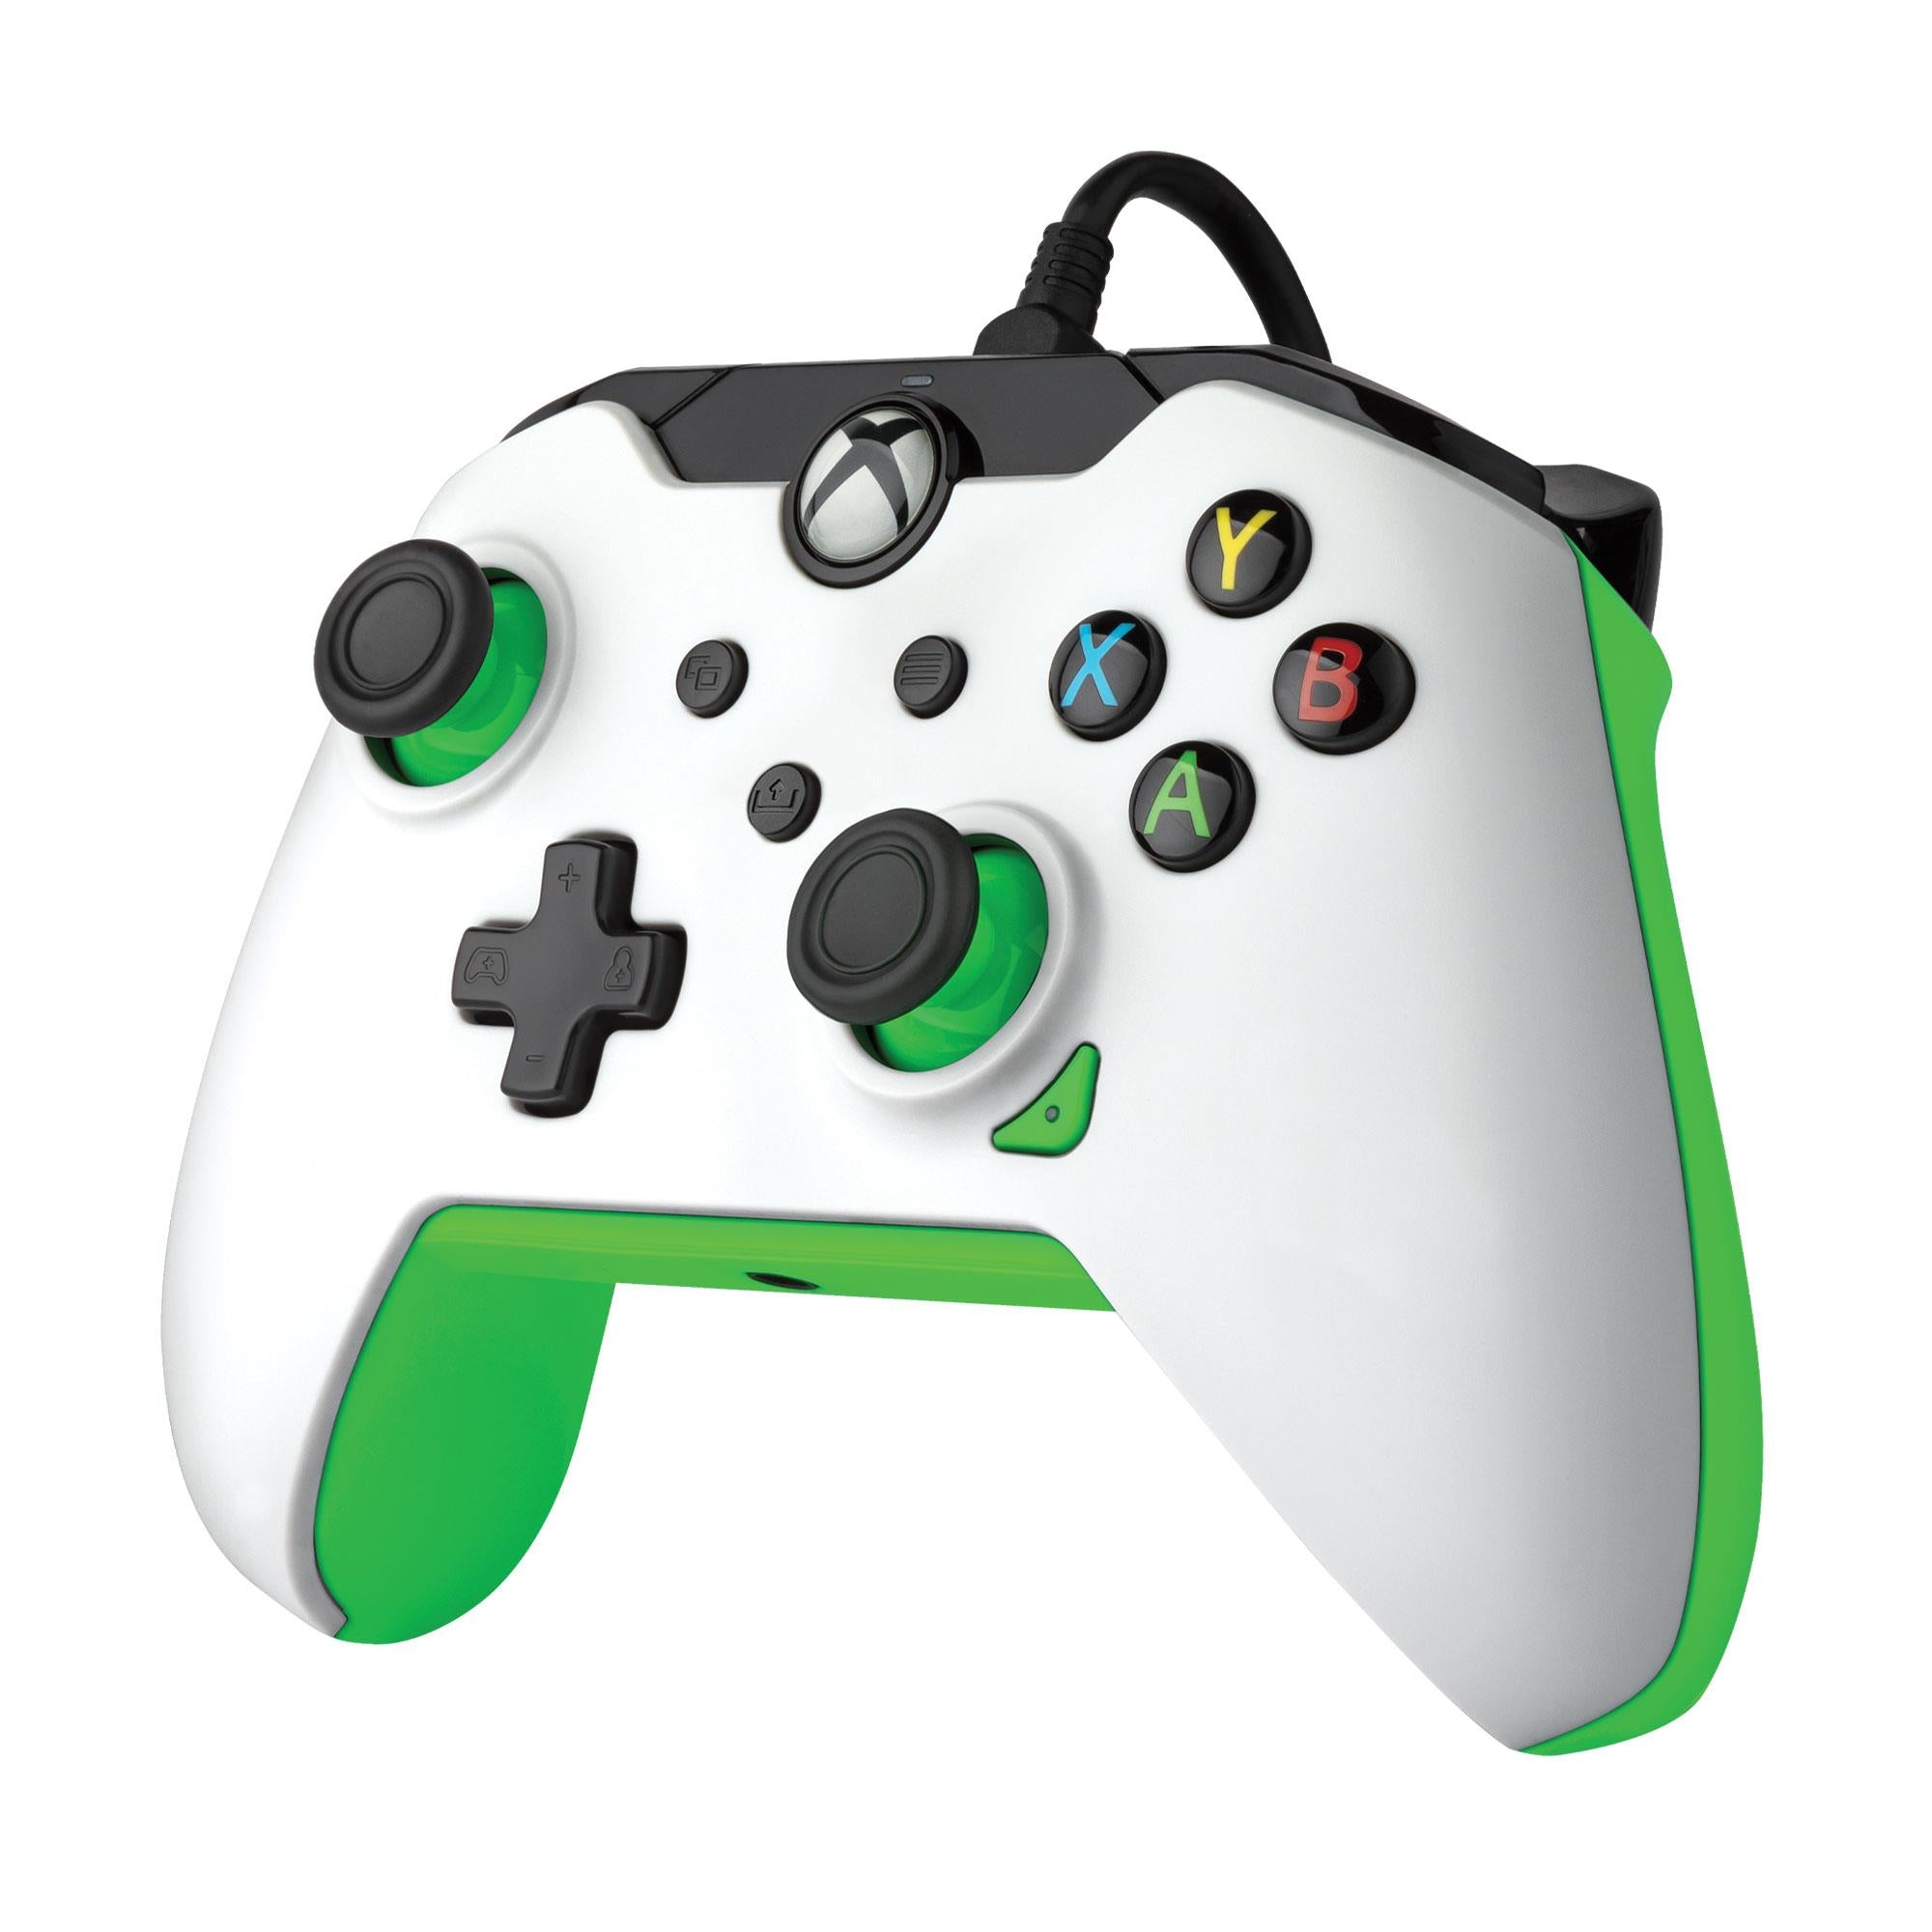 wired controller for xbox series x|s (white green)